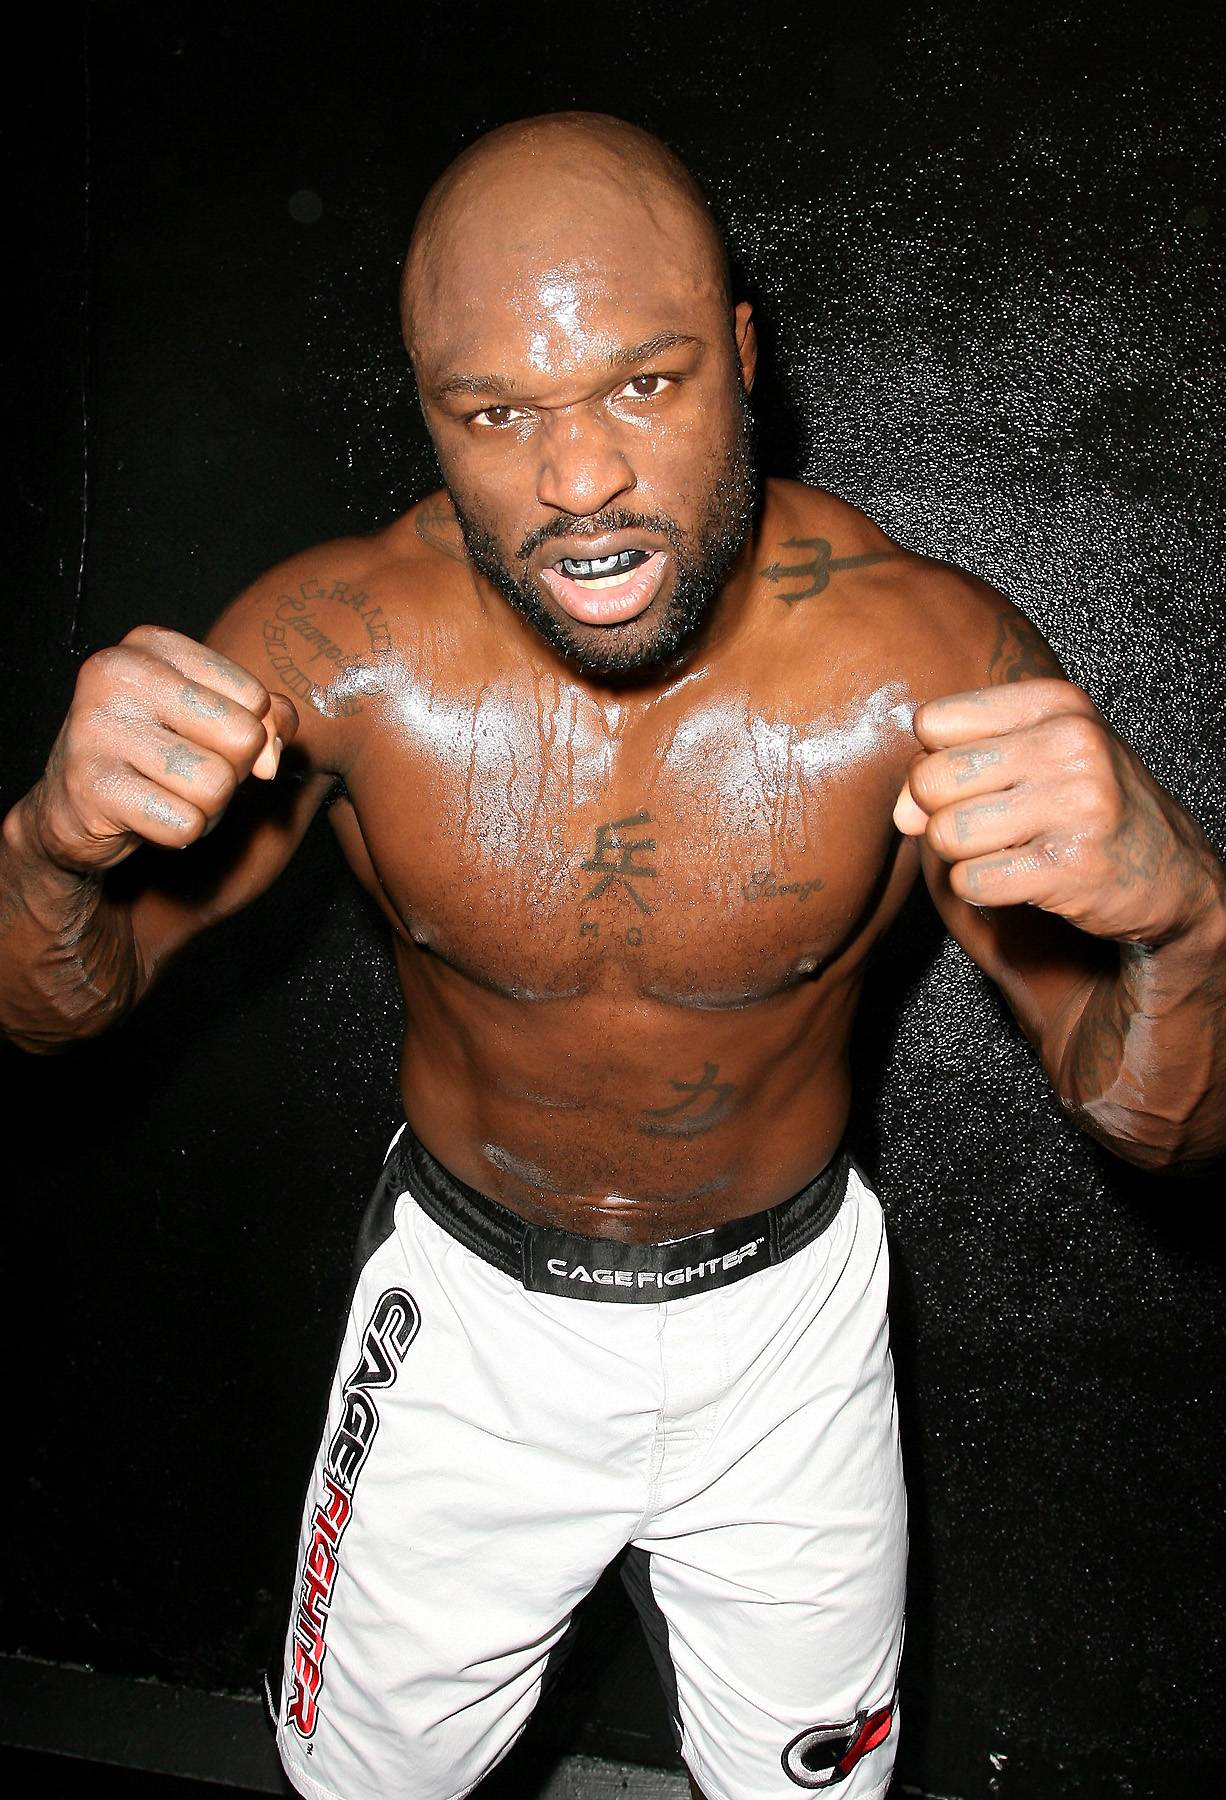 King of the Ring - Mixed martial arts fighter Muhammed Lawal, also known as King Mo, recently signed a landmark joint deal to appear at both MMA’s Bellator Fighting Championships and TNA’s IMPACT Wrestling. To prep for his crossover into pro wrestling, Lawal reportedly reached out to legends Hulk Hogan and Sting for advice, who told the fighter to relax and &quot;just to learn and have fun.” Lawal makes his TNA debut this summer.&nbsp;  (Photo: Valerie Macon/Getty Images)